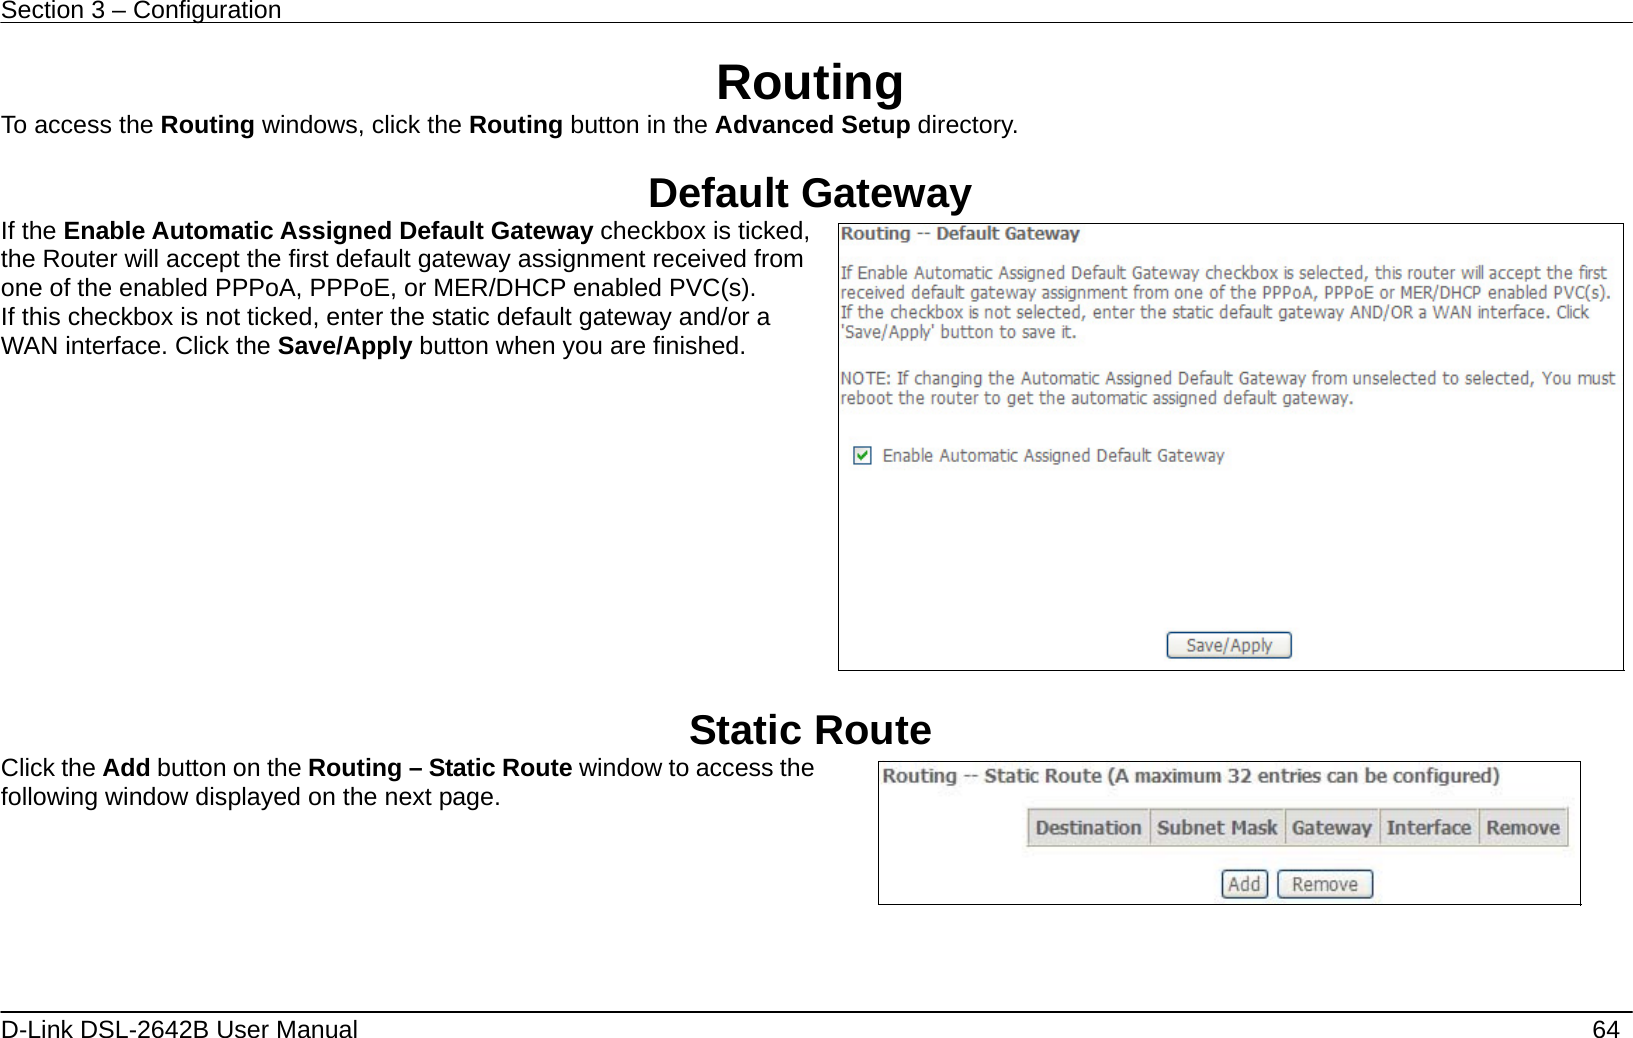 Section 3 – Configuration   D-Link DSL-2642B User Manual    64 Routing To access the Routing windows, click the Routing button in the Advanced Setup directory.  Default Gateway If the Enable Automatic Assigned Default Gateway checkbox is ticked, the Router will accept the first default gateway assignment received from one of the enabled PPPoA, PPPoE, or MER/DHCP enabled PVC(s). If this checkbox is not ticked, enter the static default gateway and/or a WAN interface. Click the Save/Apply button when you are finished.     Static Route Click the Add button on the Routing – Static Route window to access the following window displayed on the next page.     